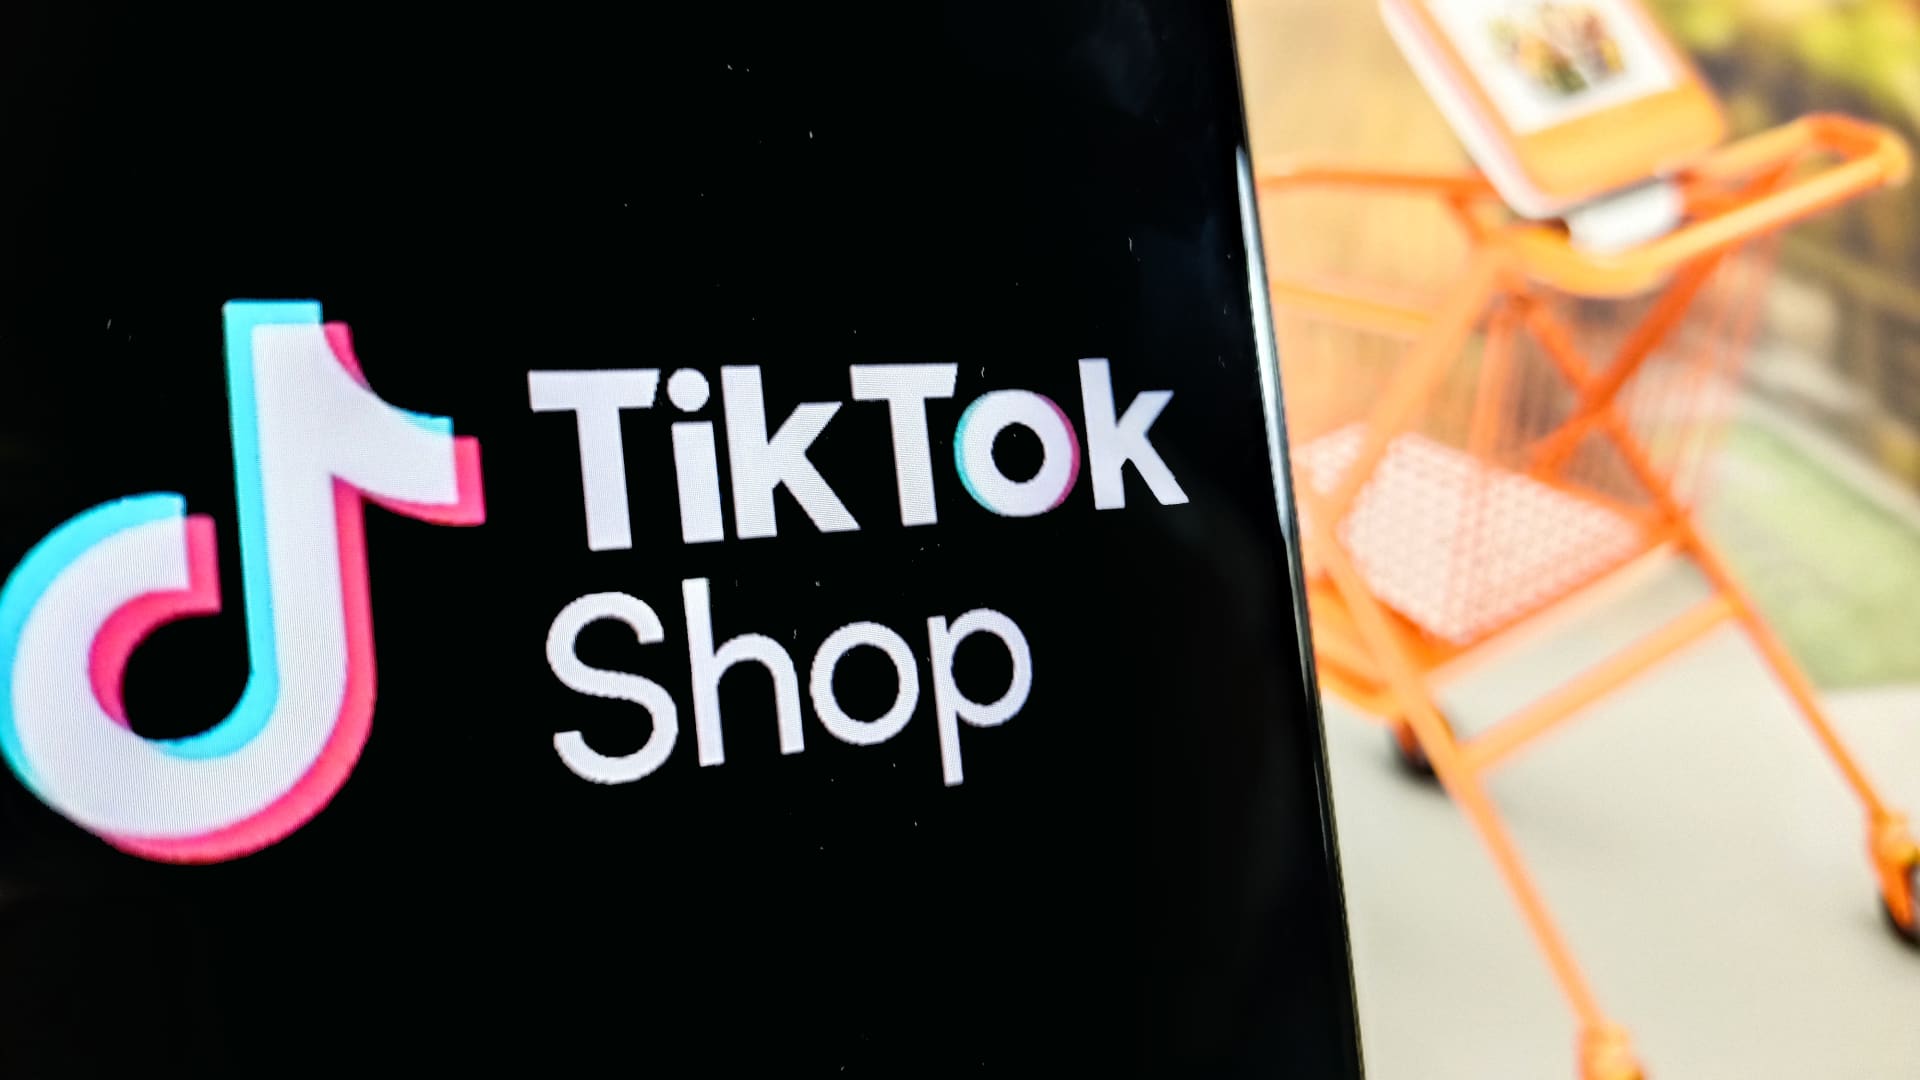 It’s TikTok Shop’s first Christmas, and shoppers are torn between hot deals and ethics